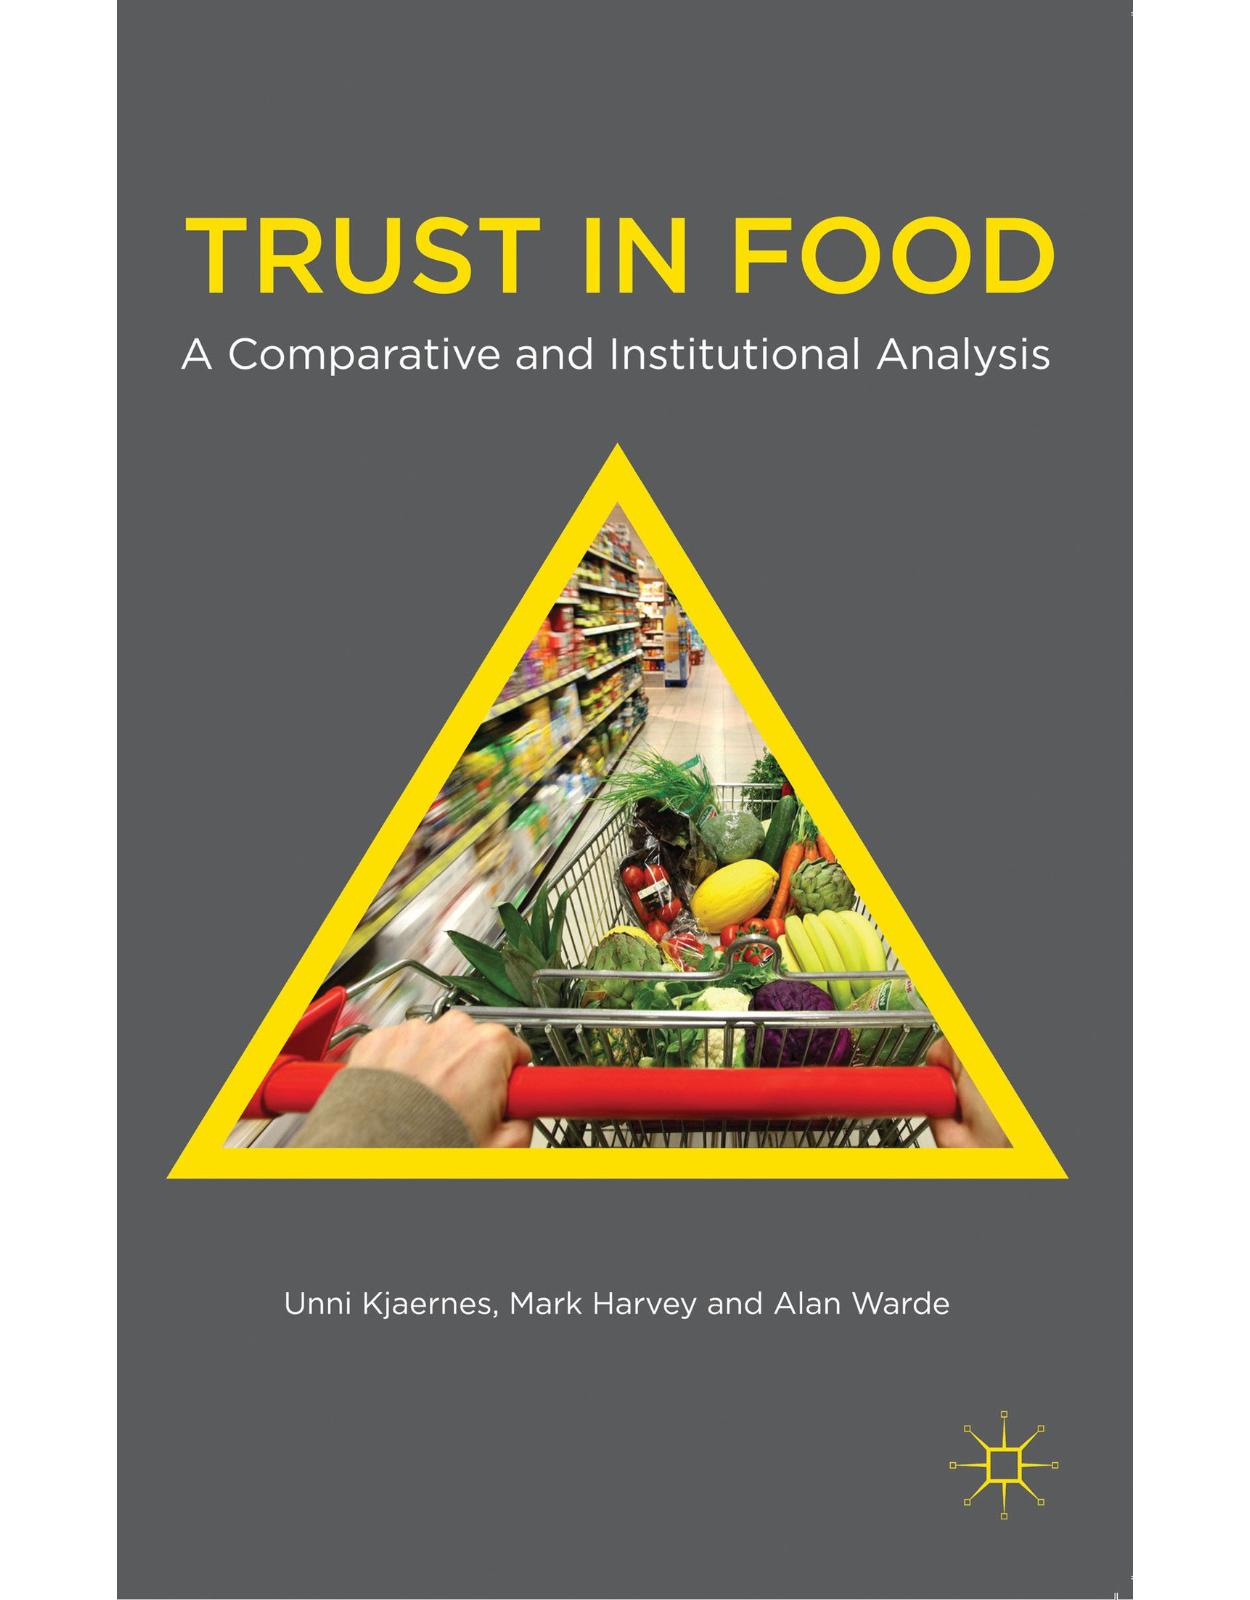 Trust in Food: A Comparative and Institutional Analysis